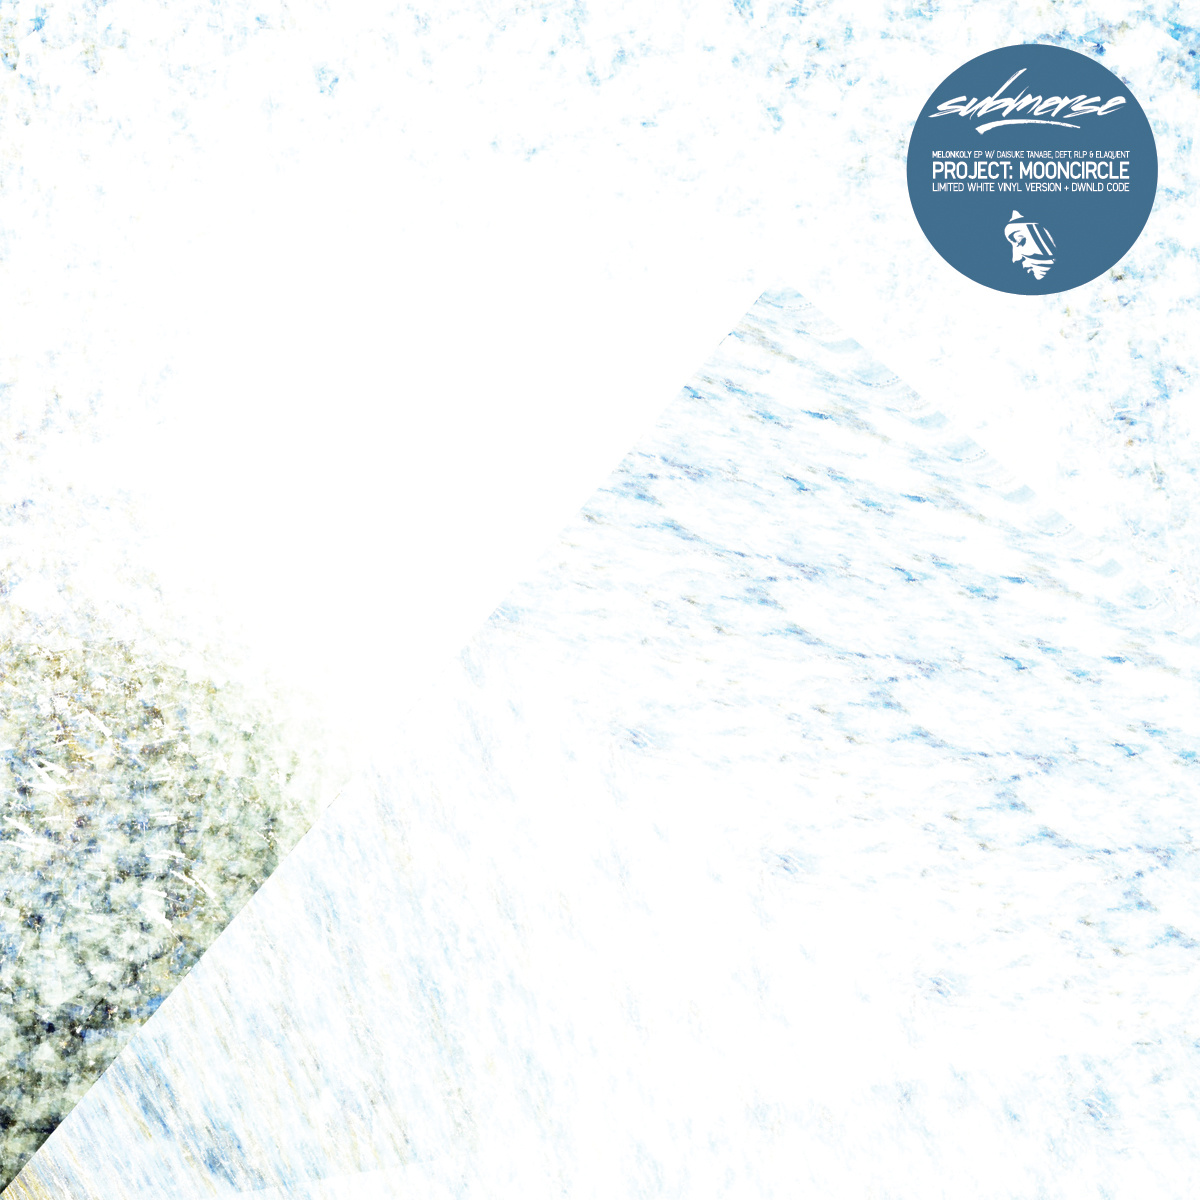 Submerse "Melonkoly" Release | @submerse